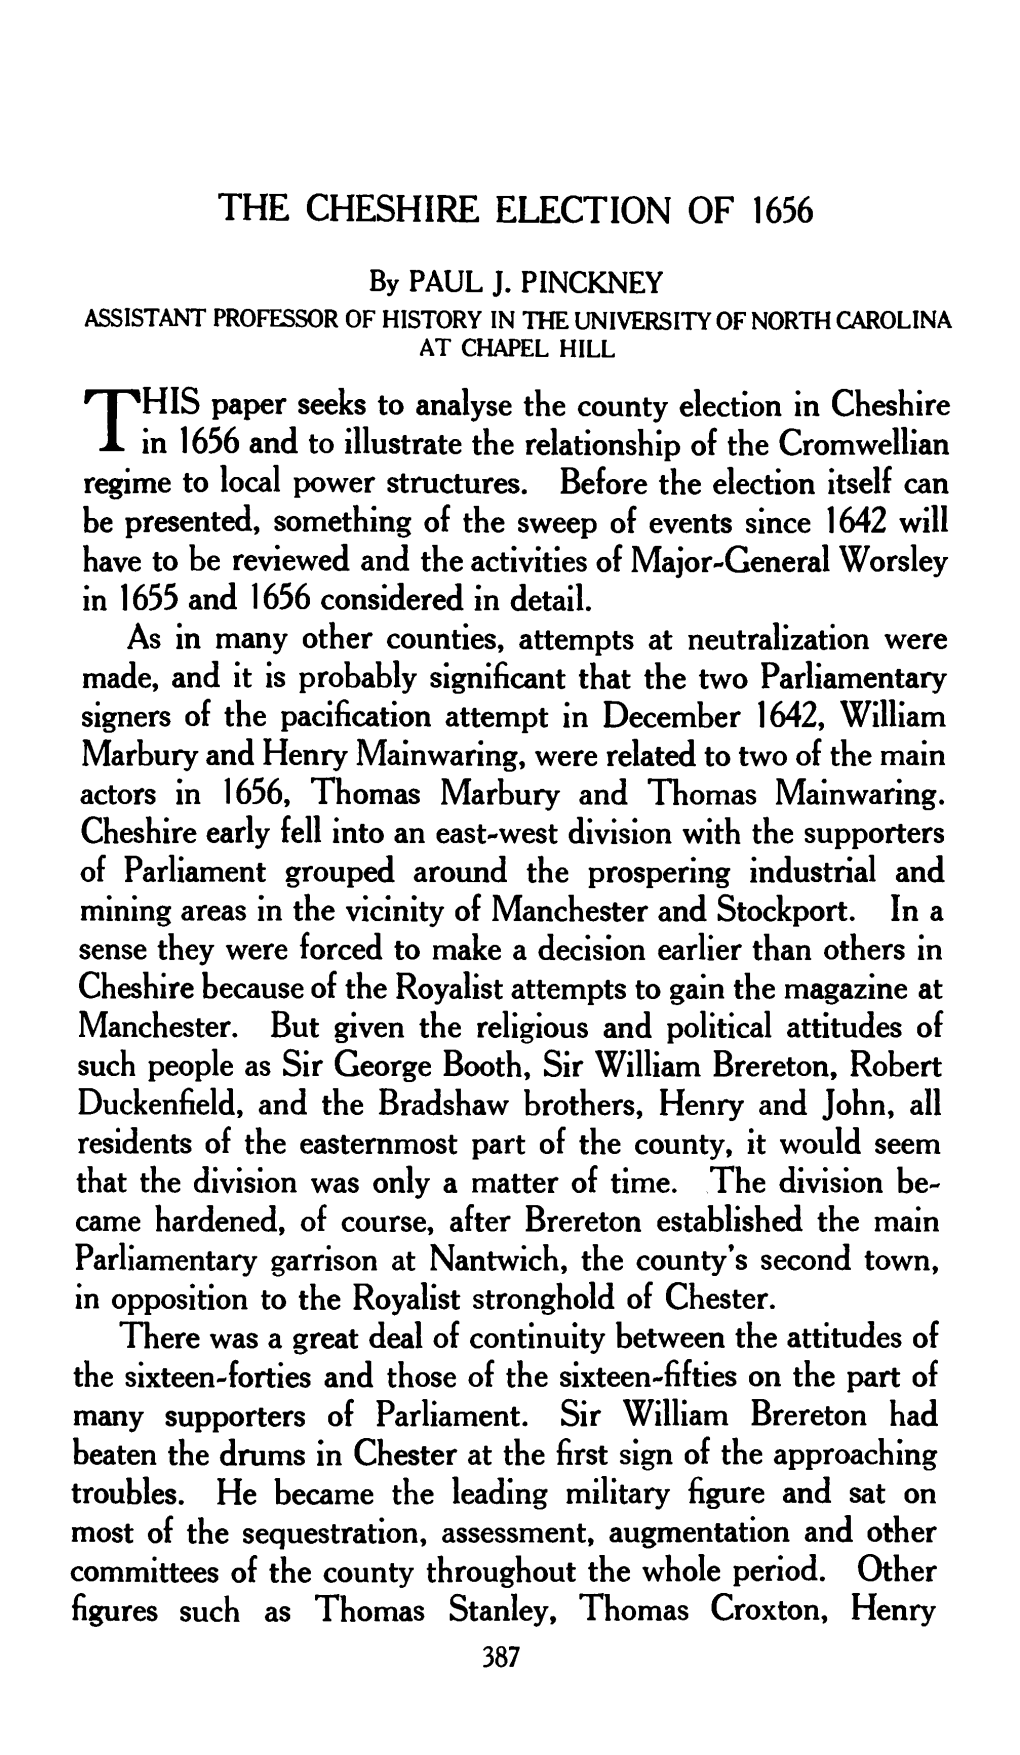 The Cheshire Election of 1656